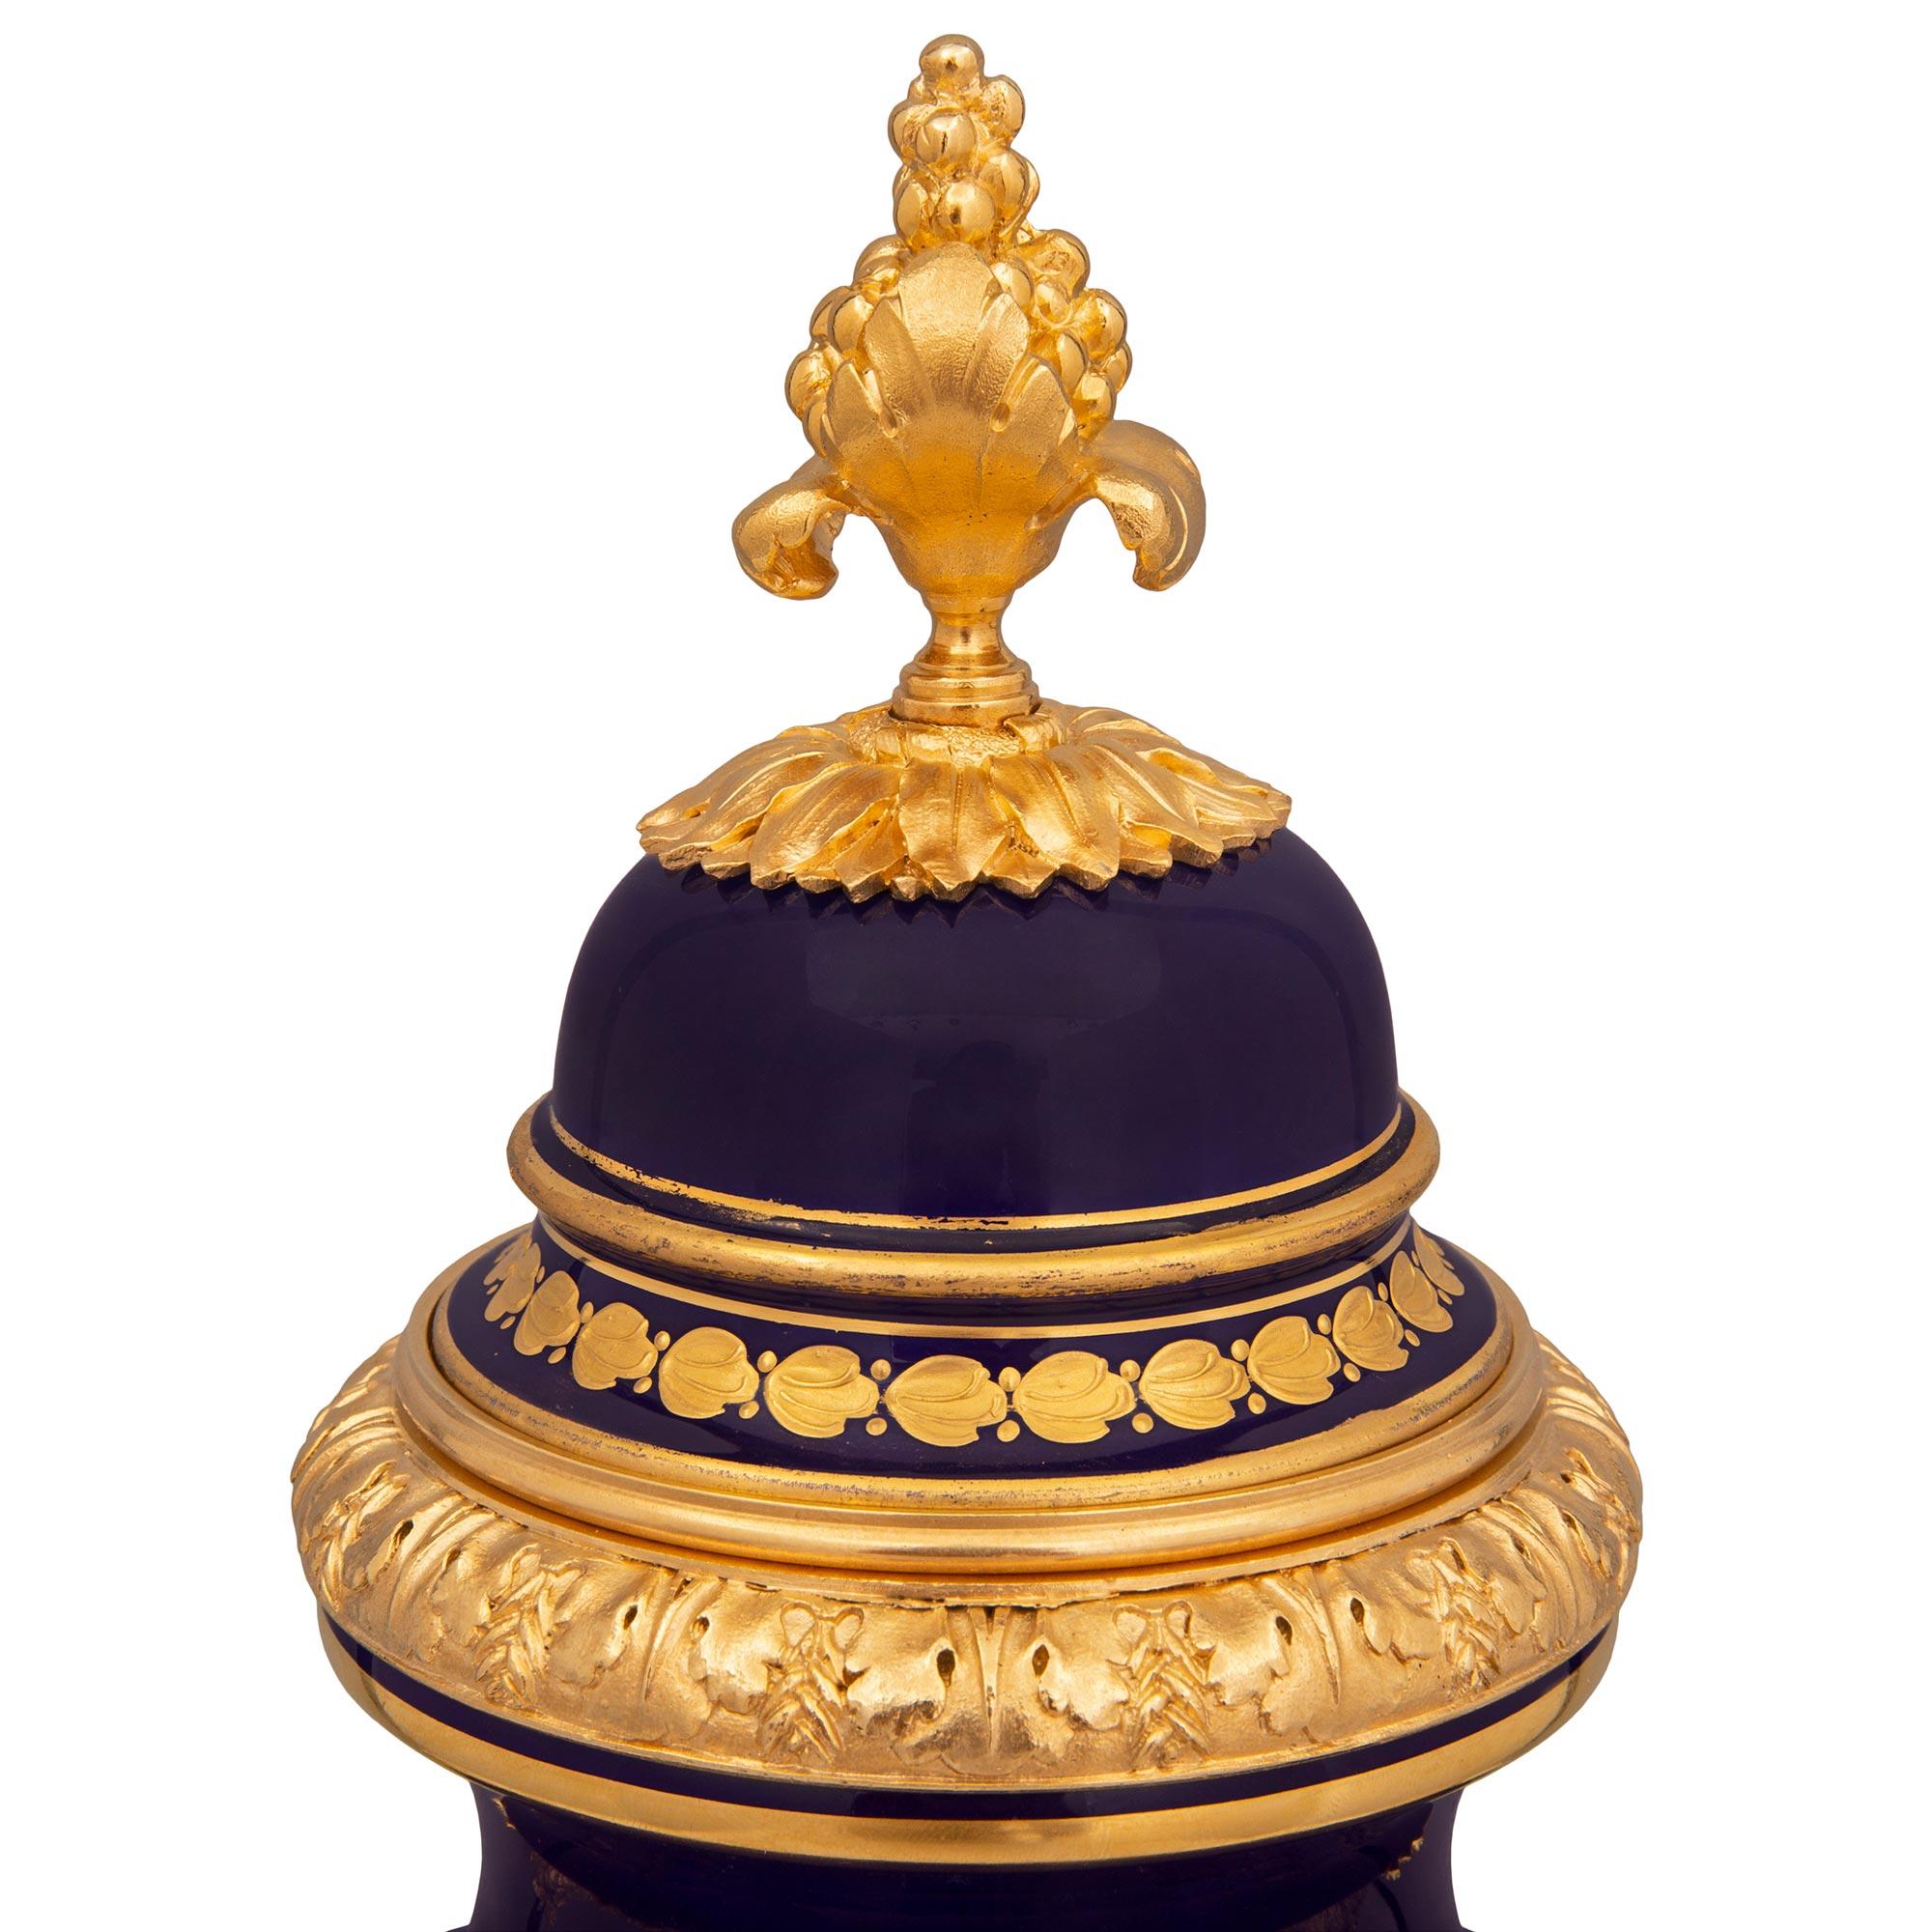 French 19th Century Louis XVI St. Sèvres Porcelain and Ormolu Lidded Urn For Sale 3